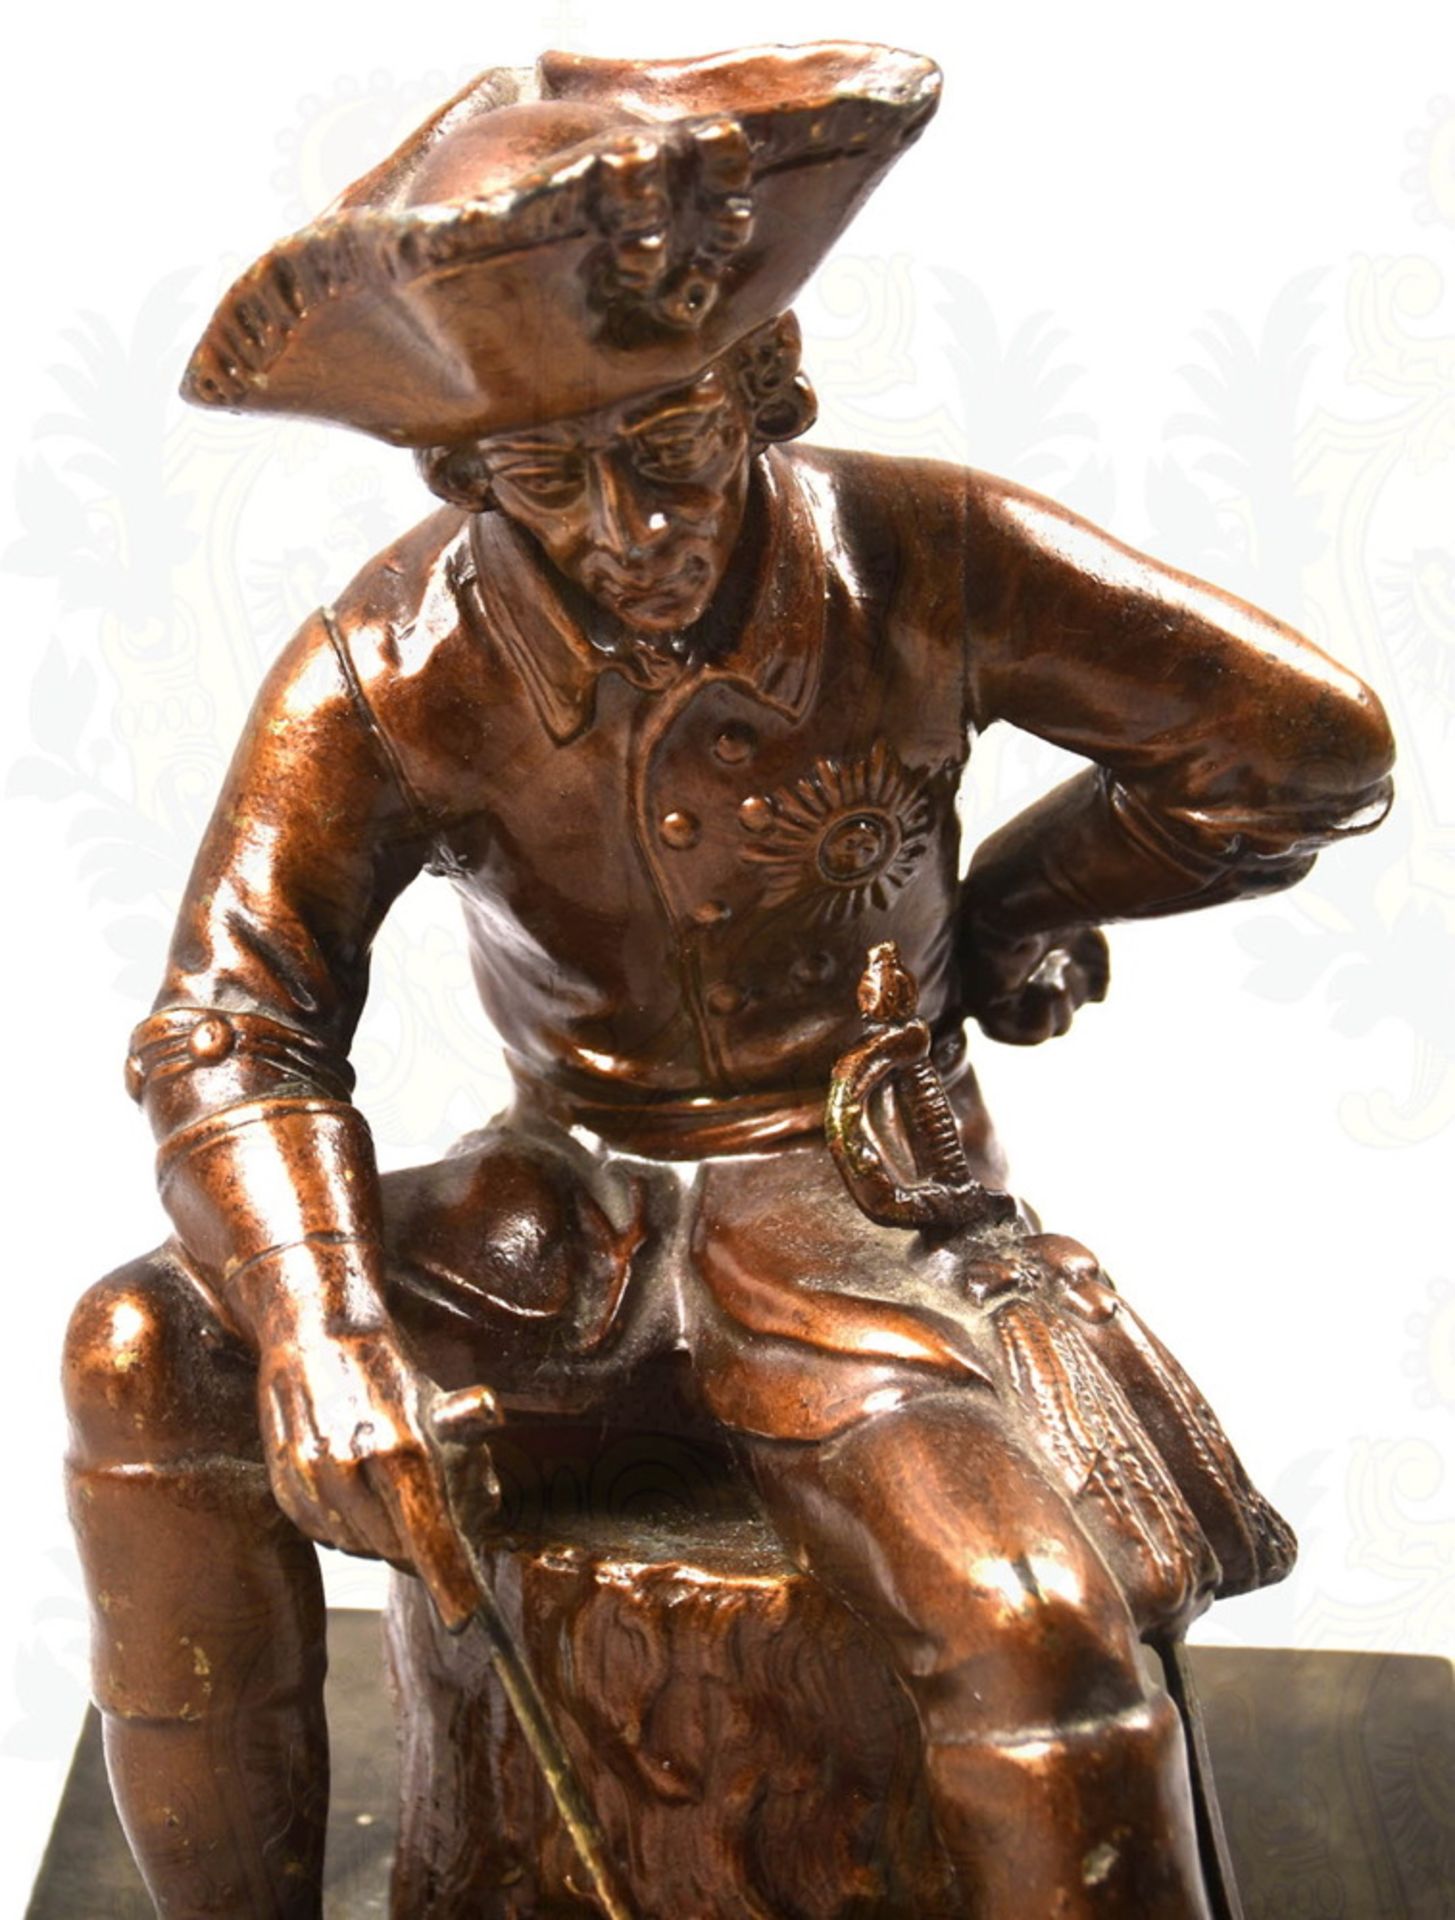 Metal figurine King Frederick the Great of Prussia - Image 2 of 3